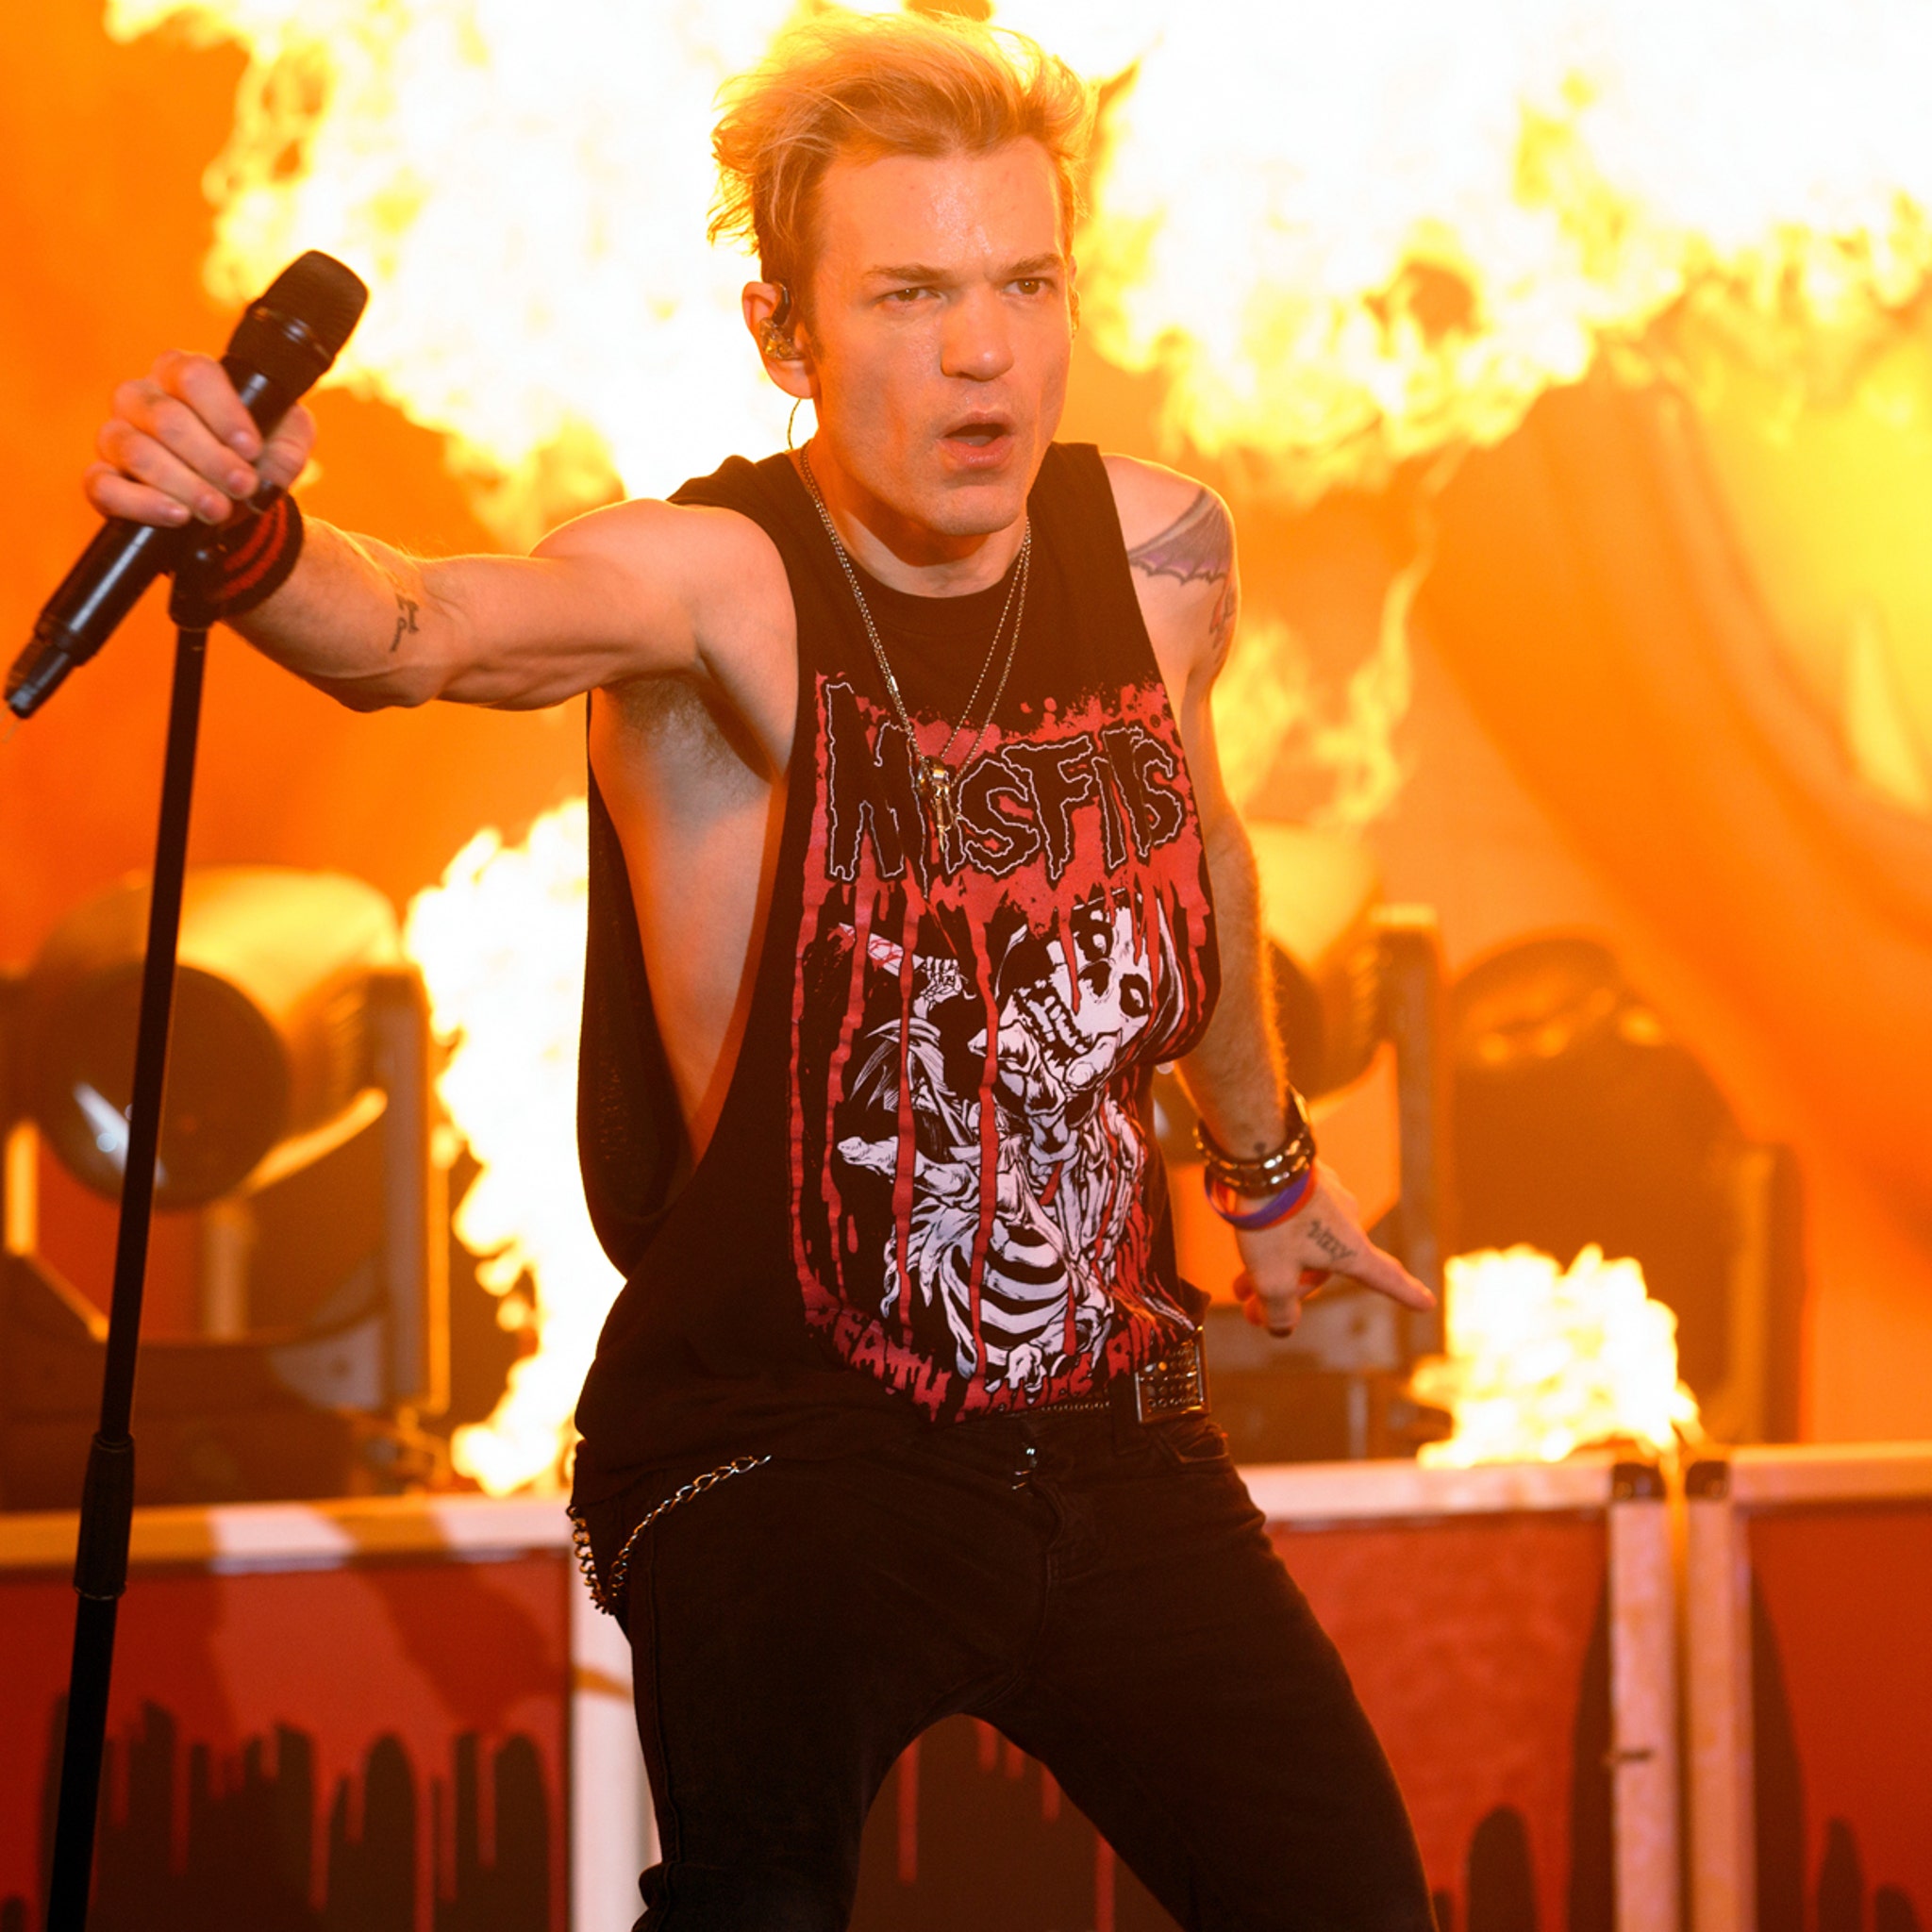 Sum 41 Disbanding After 27 Years